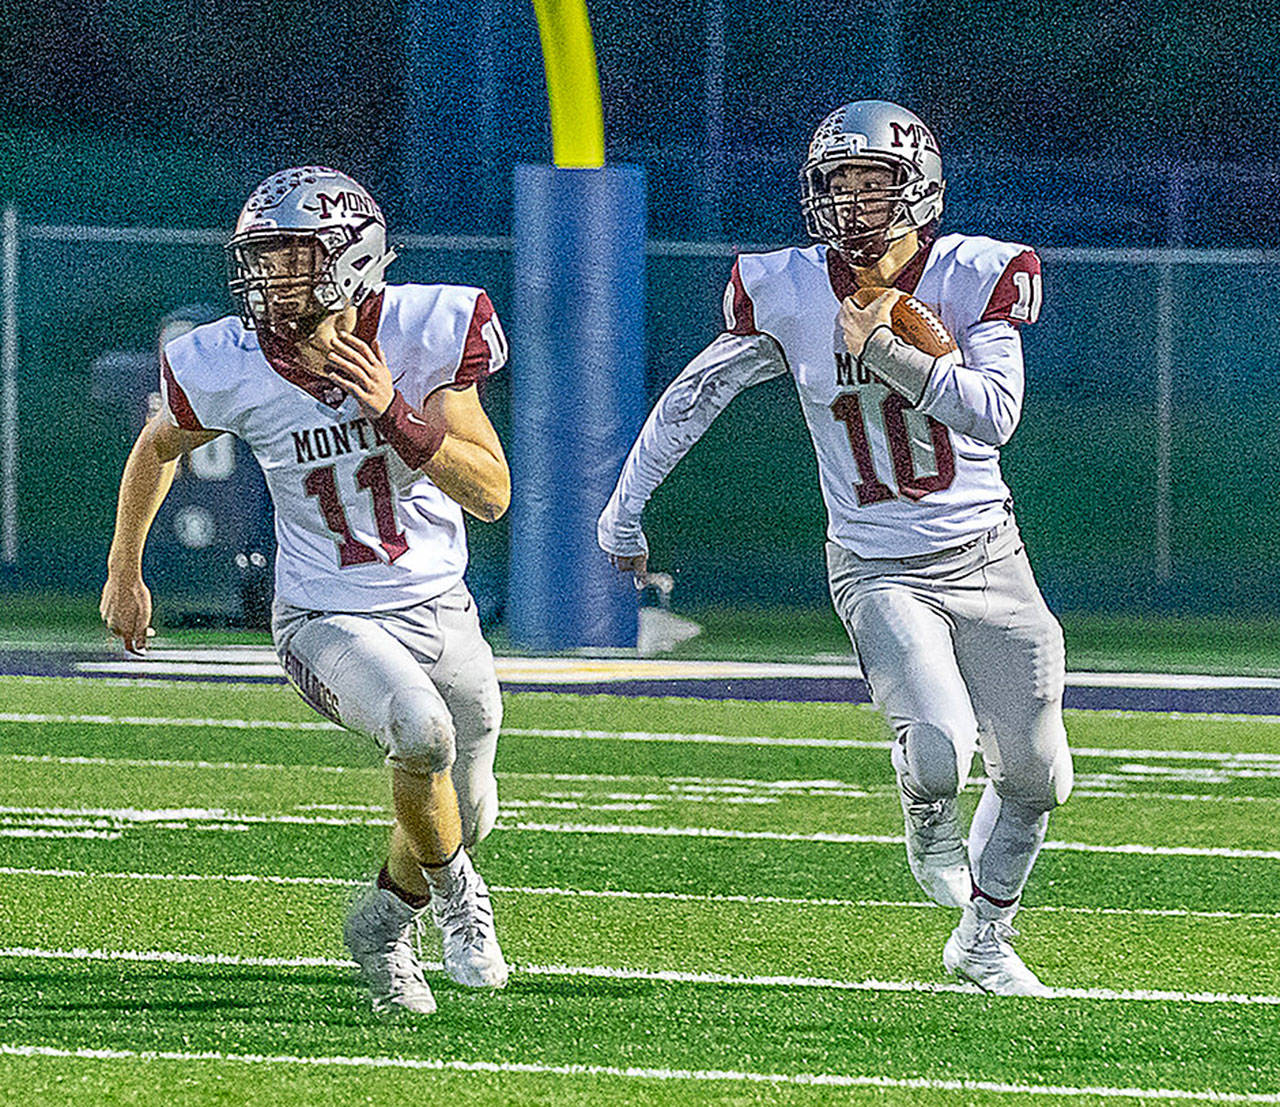 Montesano quarterback Trace Ridgway (10) carries the football while running back Brent Hollatz blocks in a game against Forks on Oct. 4. Montesano faces Hoquiam in a critical 1A Evergreen League game on Friday in Montesano. (Photo by Shawn Donnelly)